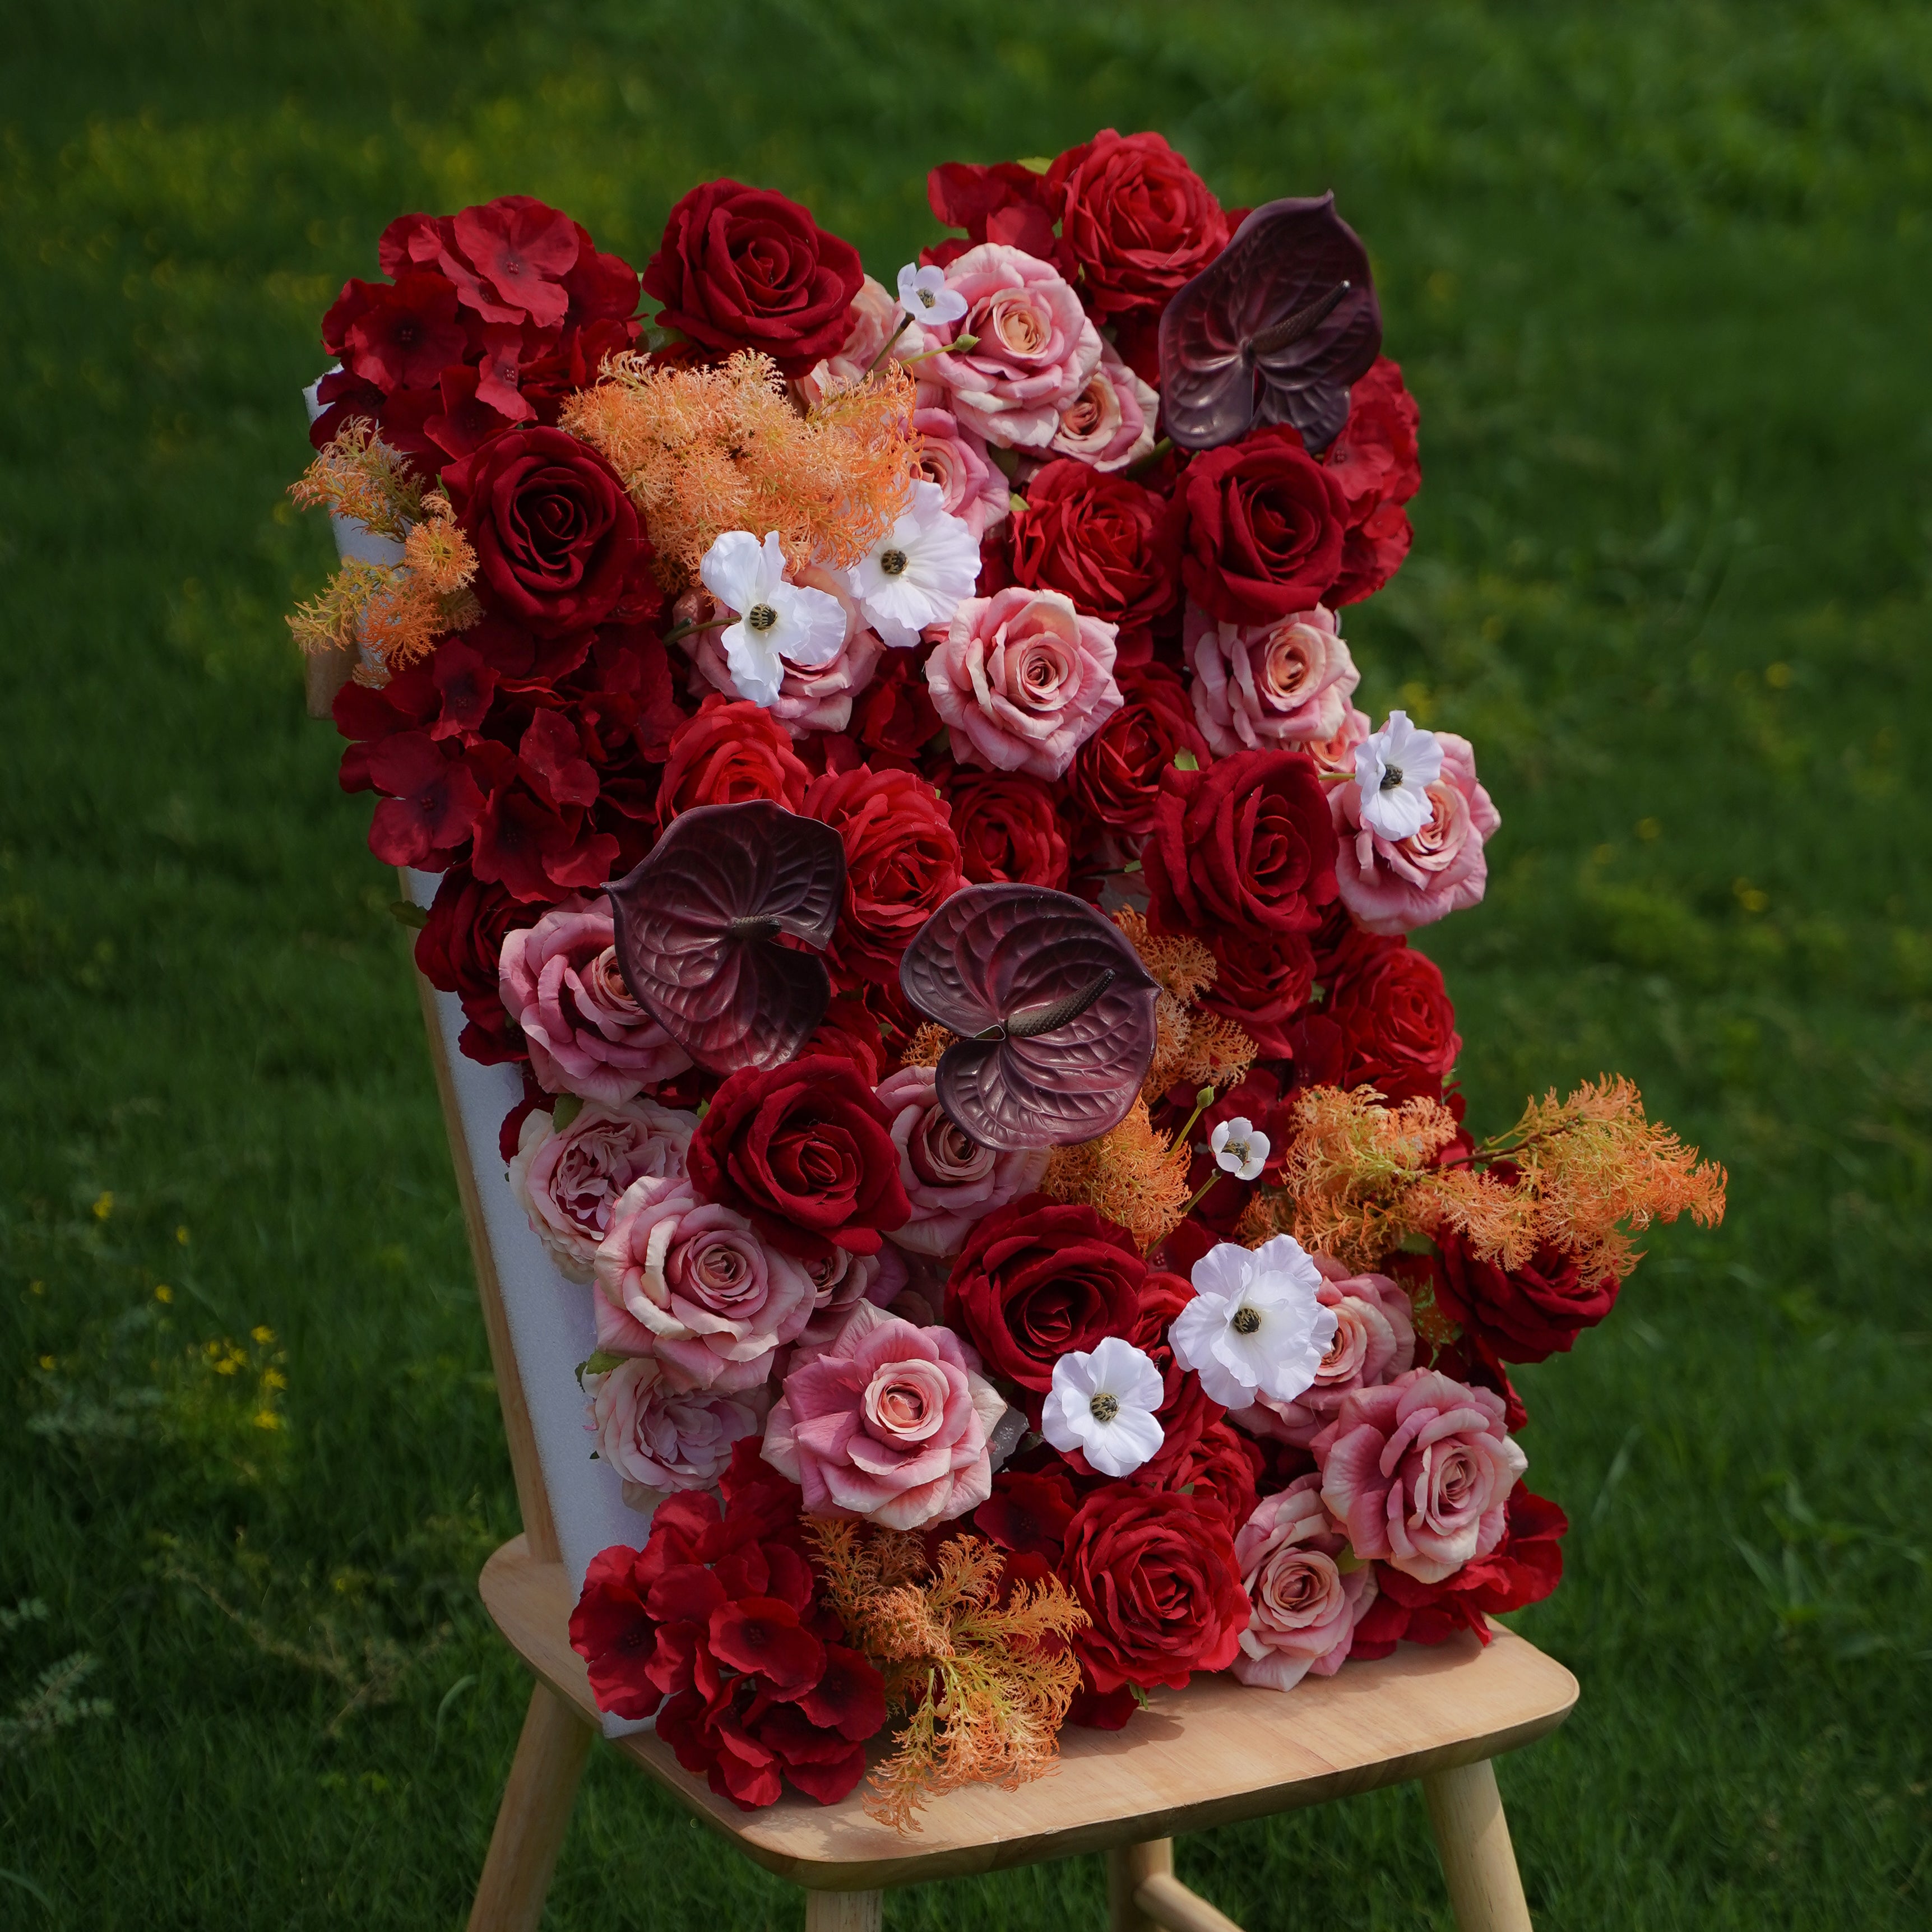 The flower walls are made of artificial flowers in various colors, layered at different levels to create a lush, elegant and natural look. The exclusive zipper design and roll-up design make it easy to install and remove.